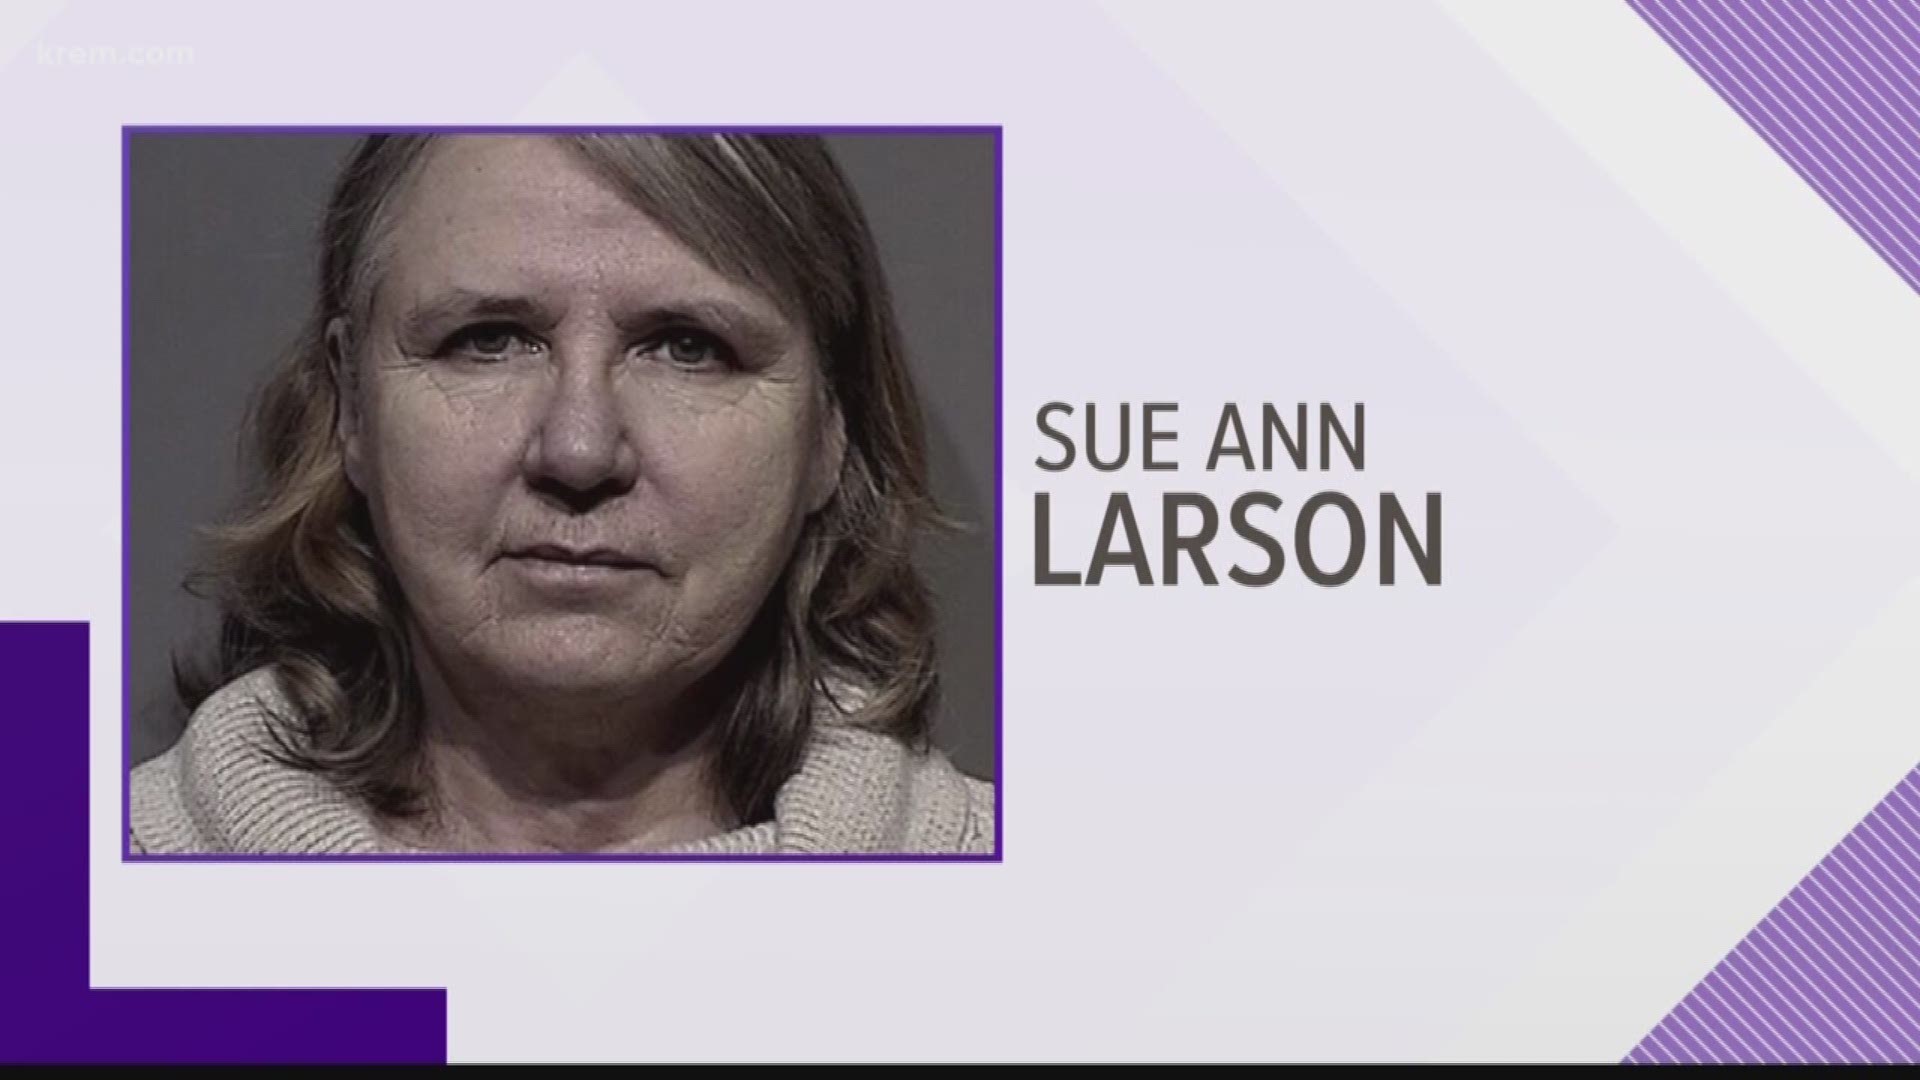 A federal judge ruled that 63-year-old Sue Ann Larson must sell her home, recreational property and two classic cars to pay over $1.4 million in restitution.